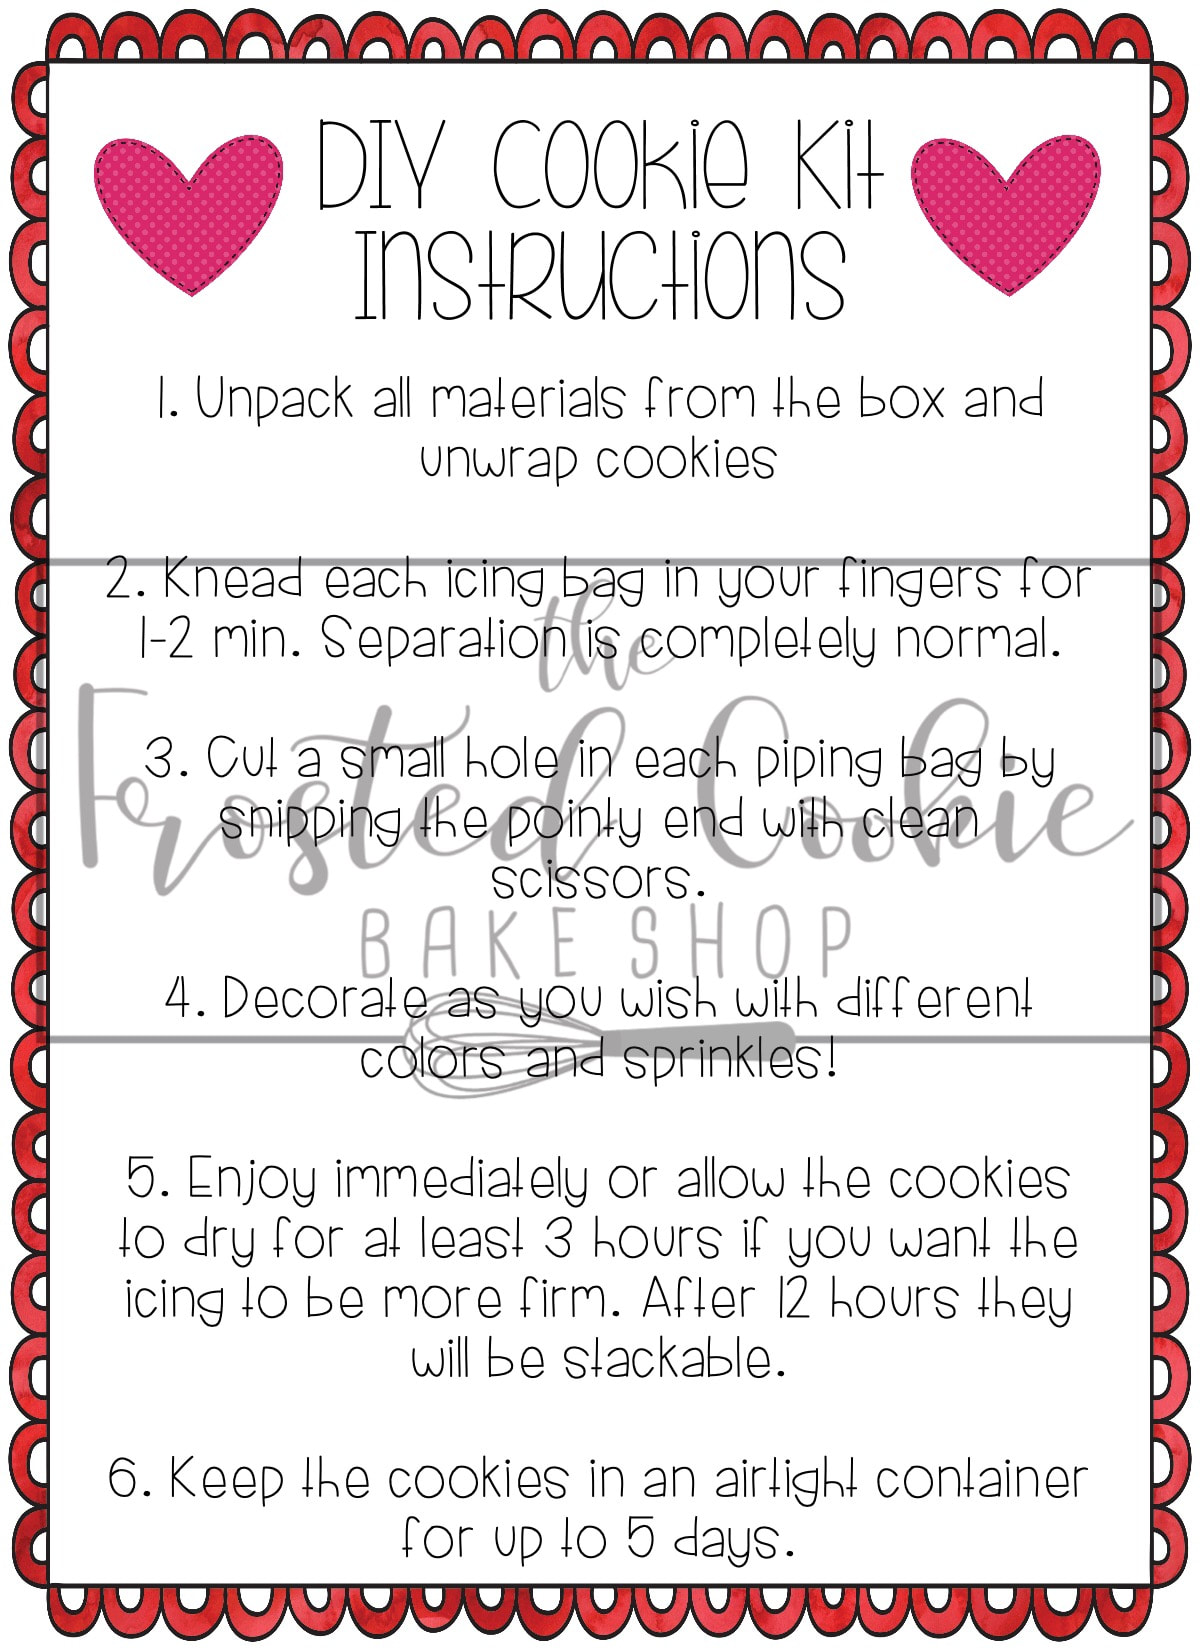 diy-cookie-kit-instructions-text-handmade-products-cookie-cards-with